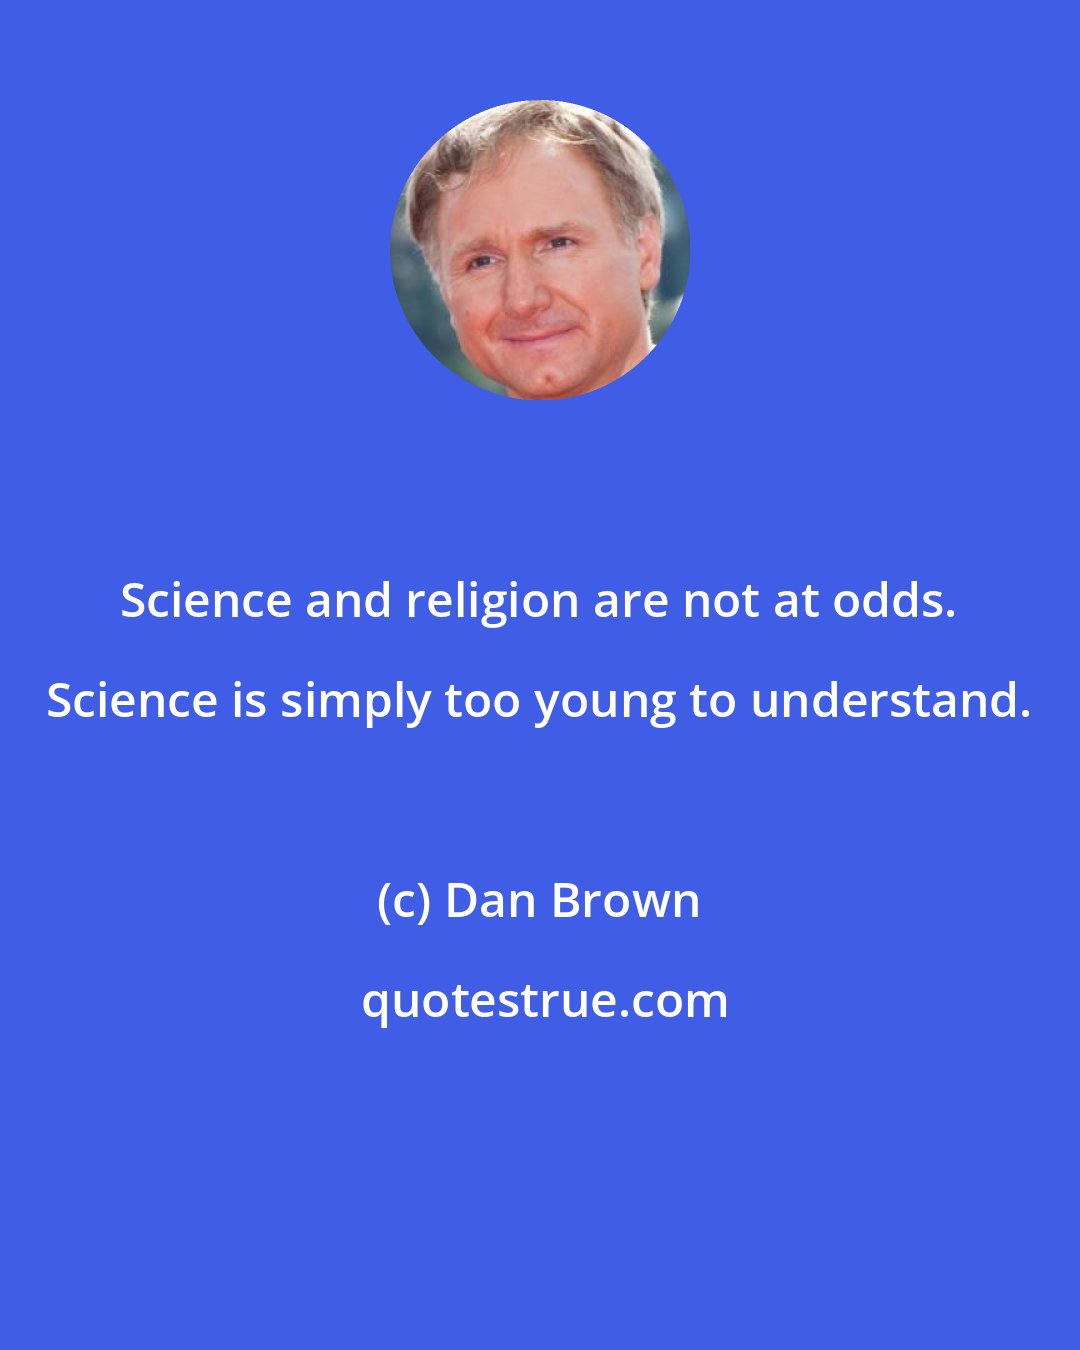 Dan Brown: Science and religion are not at odds. Science is simply too young to understand.